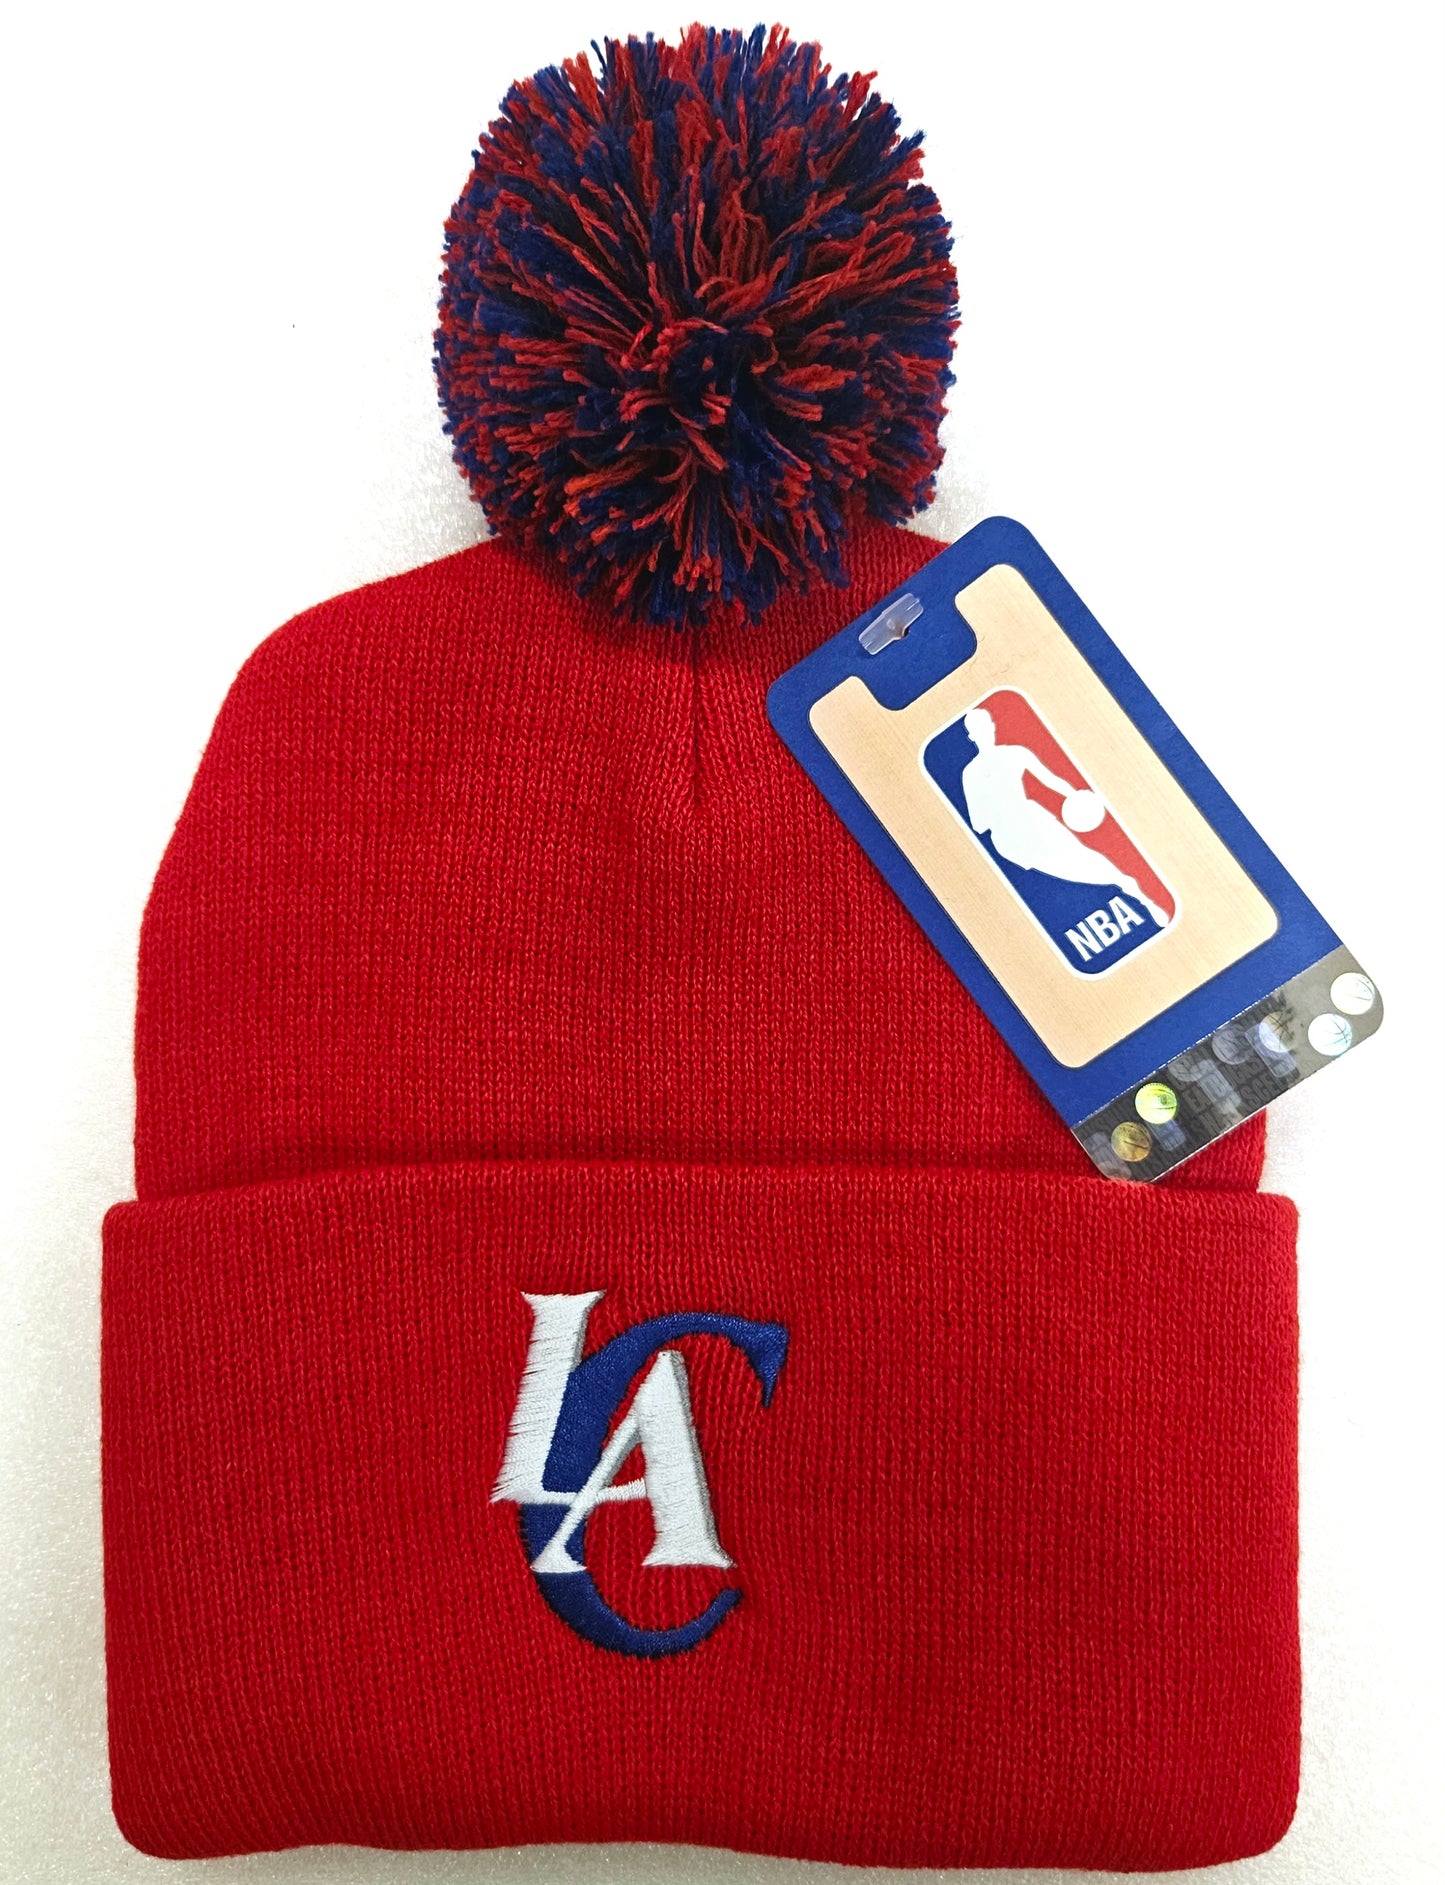 Los Angeles Clippers Logo Pom Beanie Ski Hat in Red